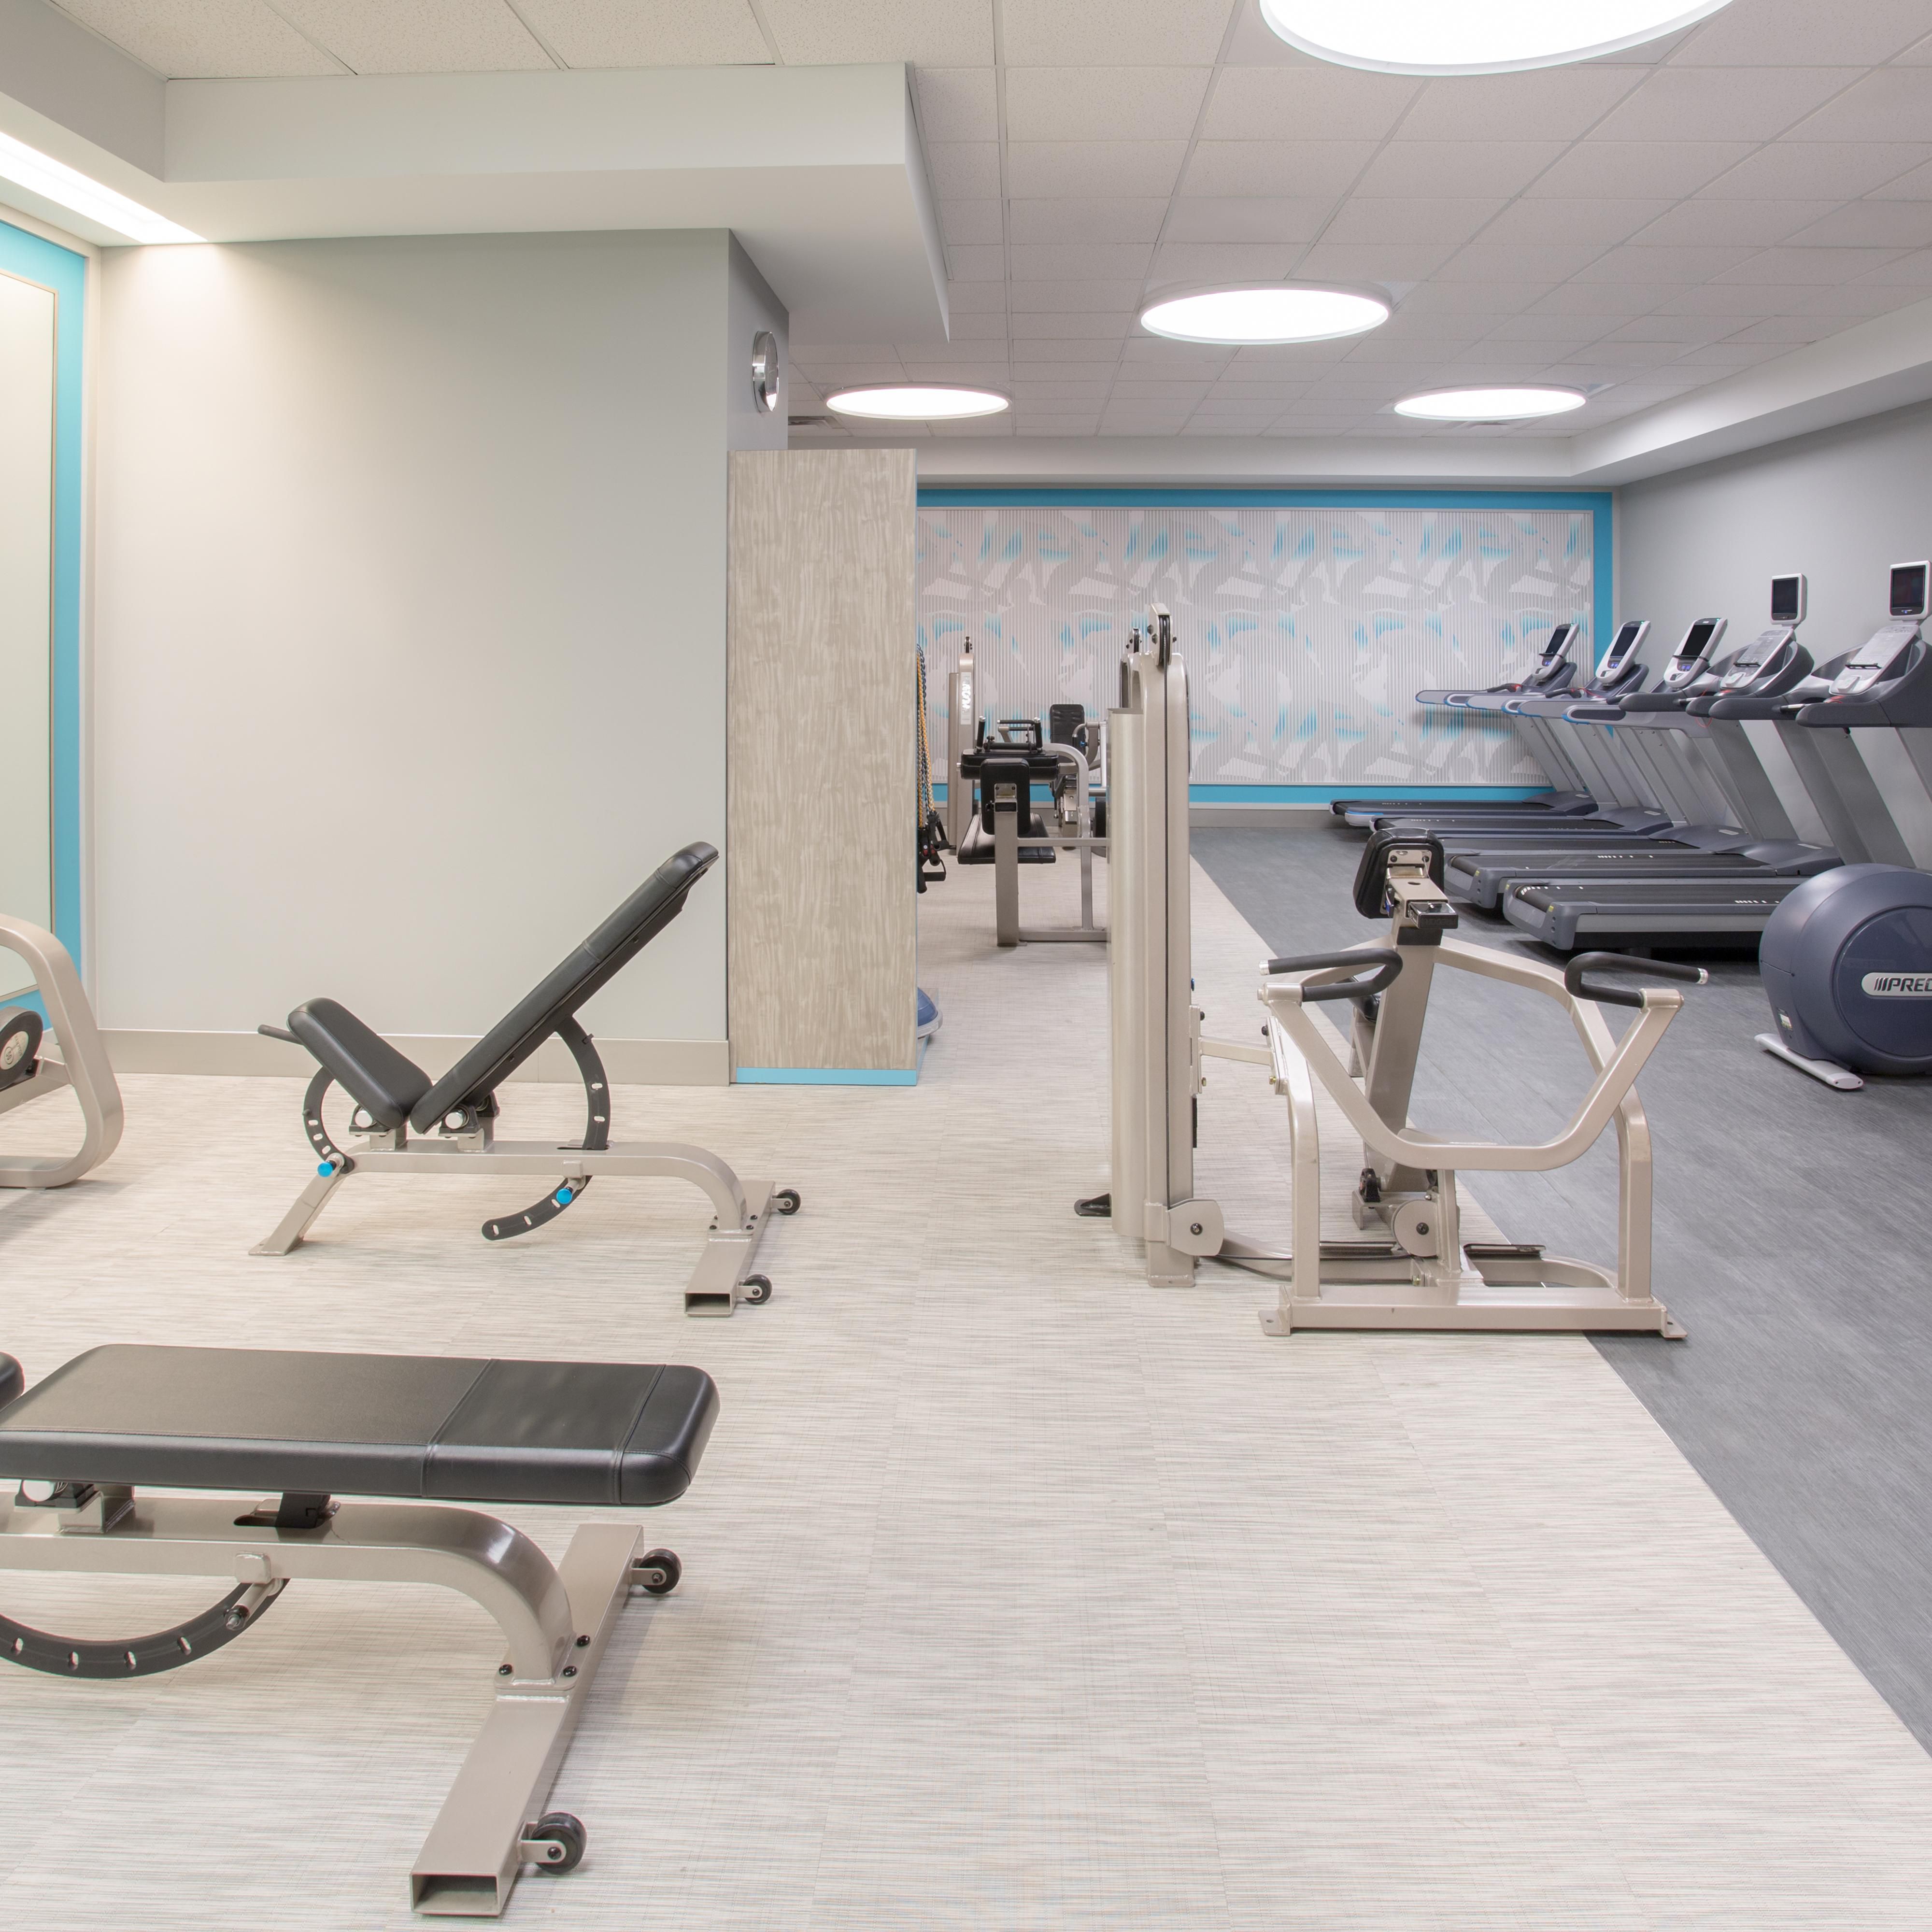 Work up a sweat in the Fitness Center.